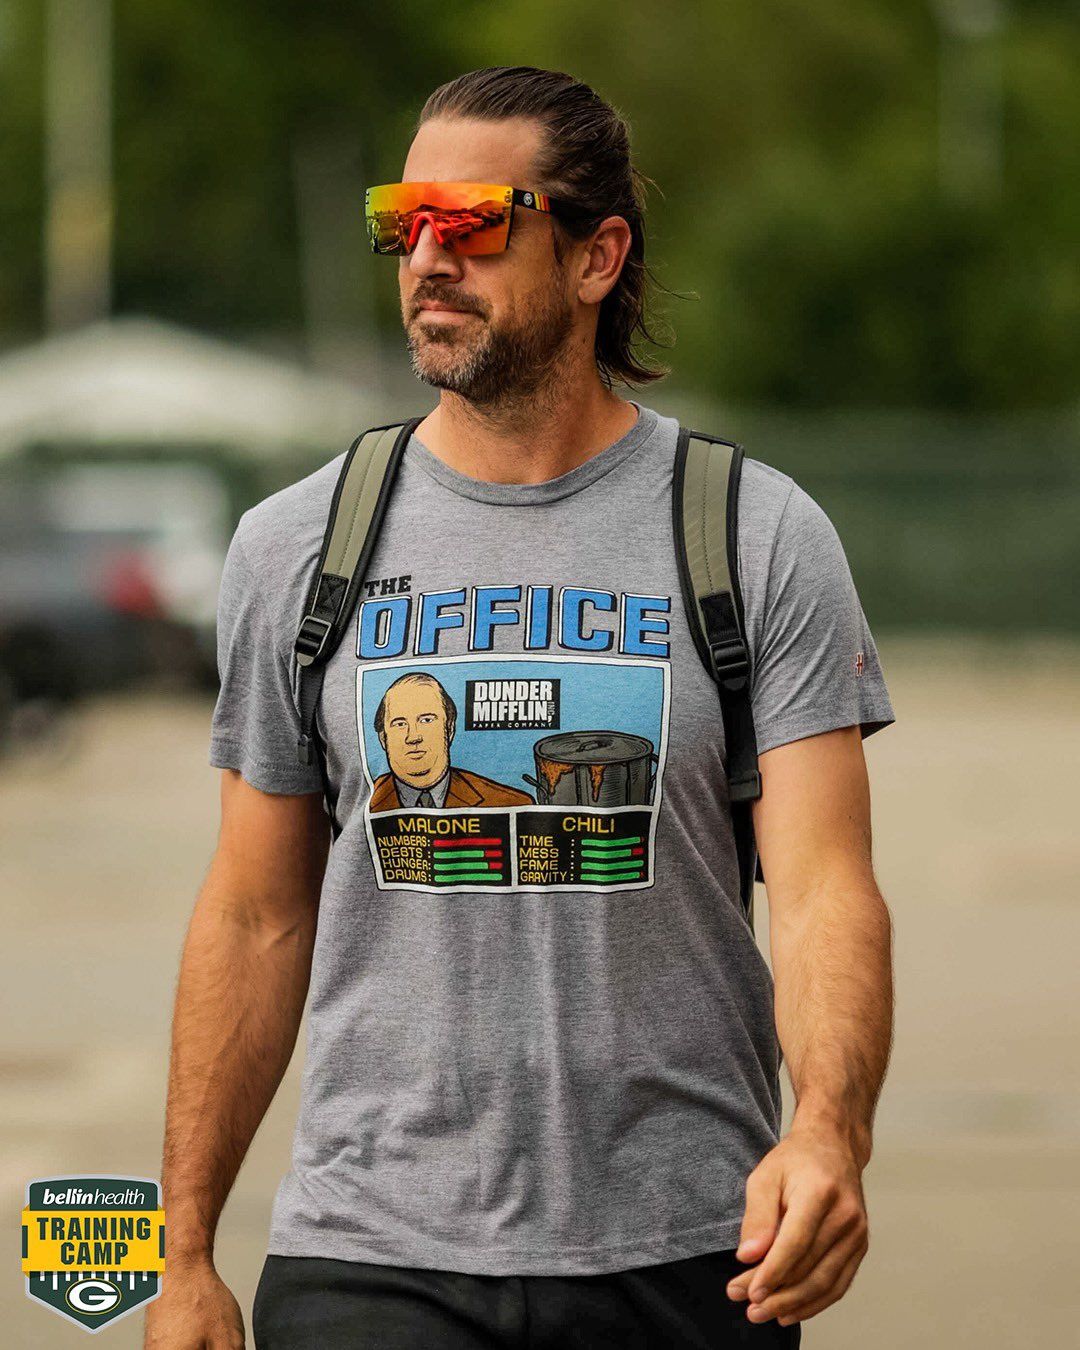 rodgers knows t shirt